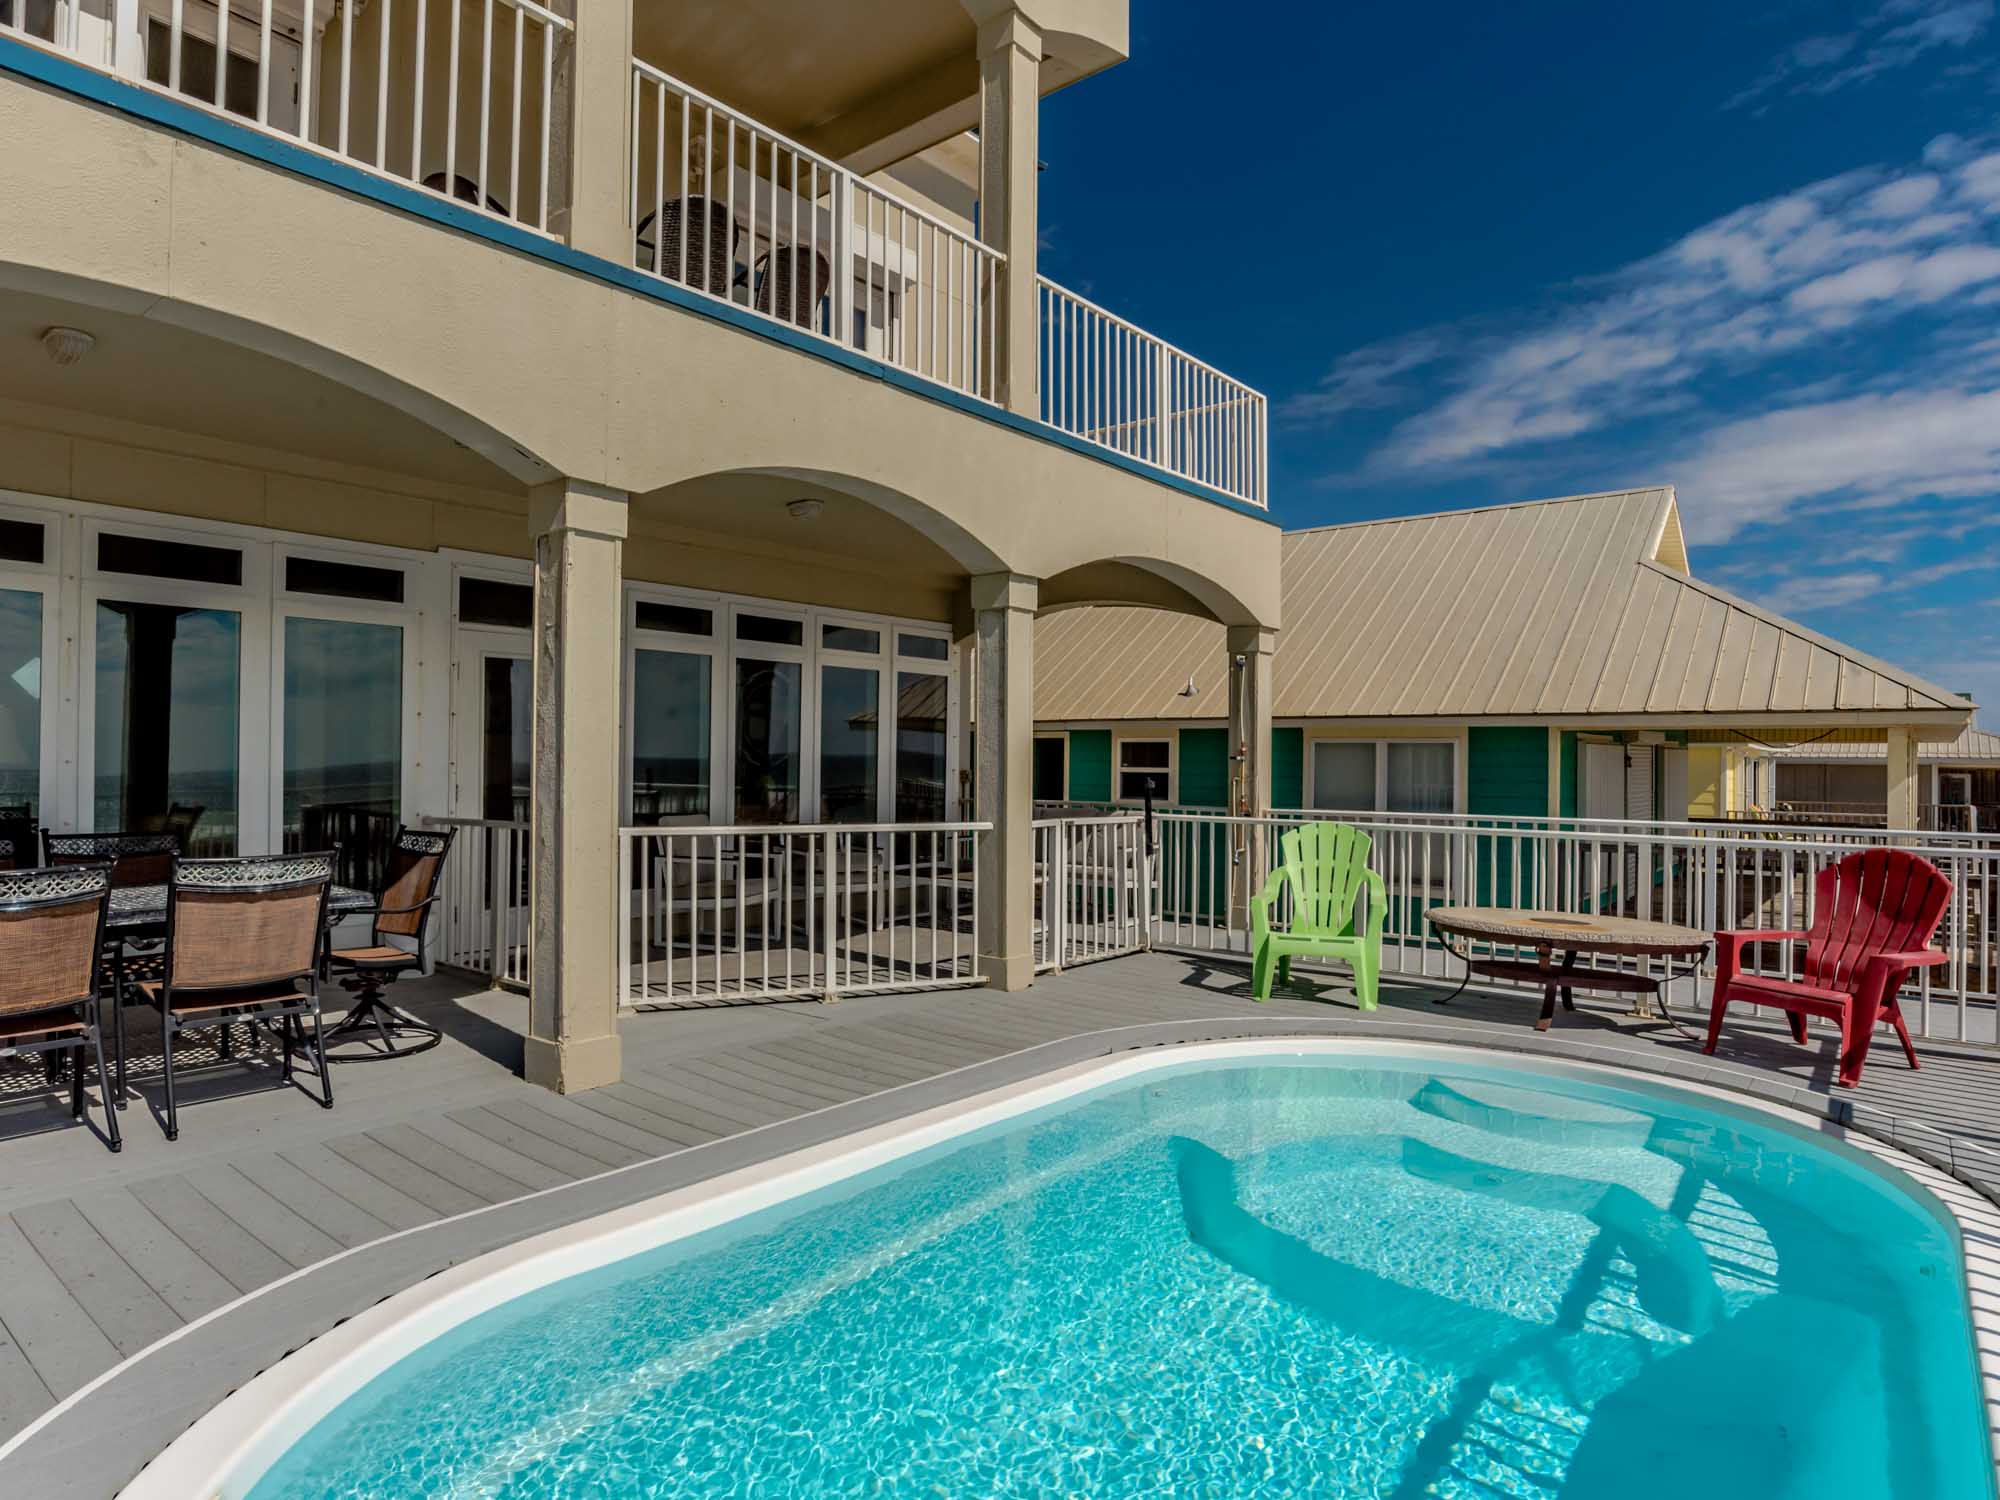 Gulf Shores Vacation Homes for the Holidays